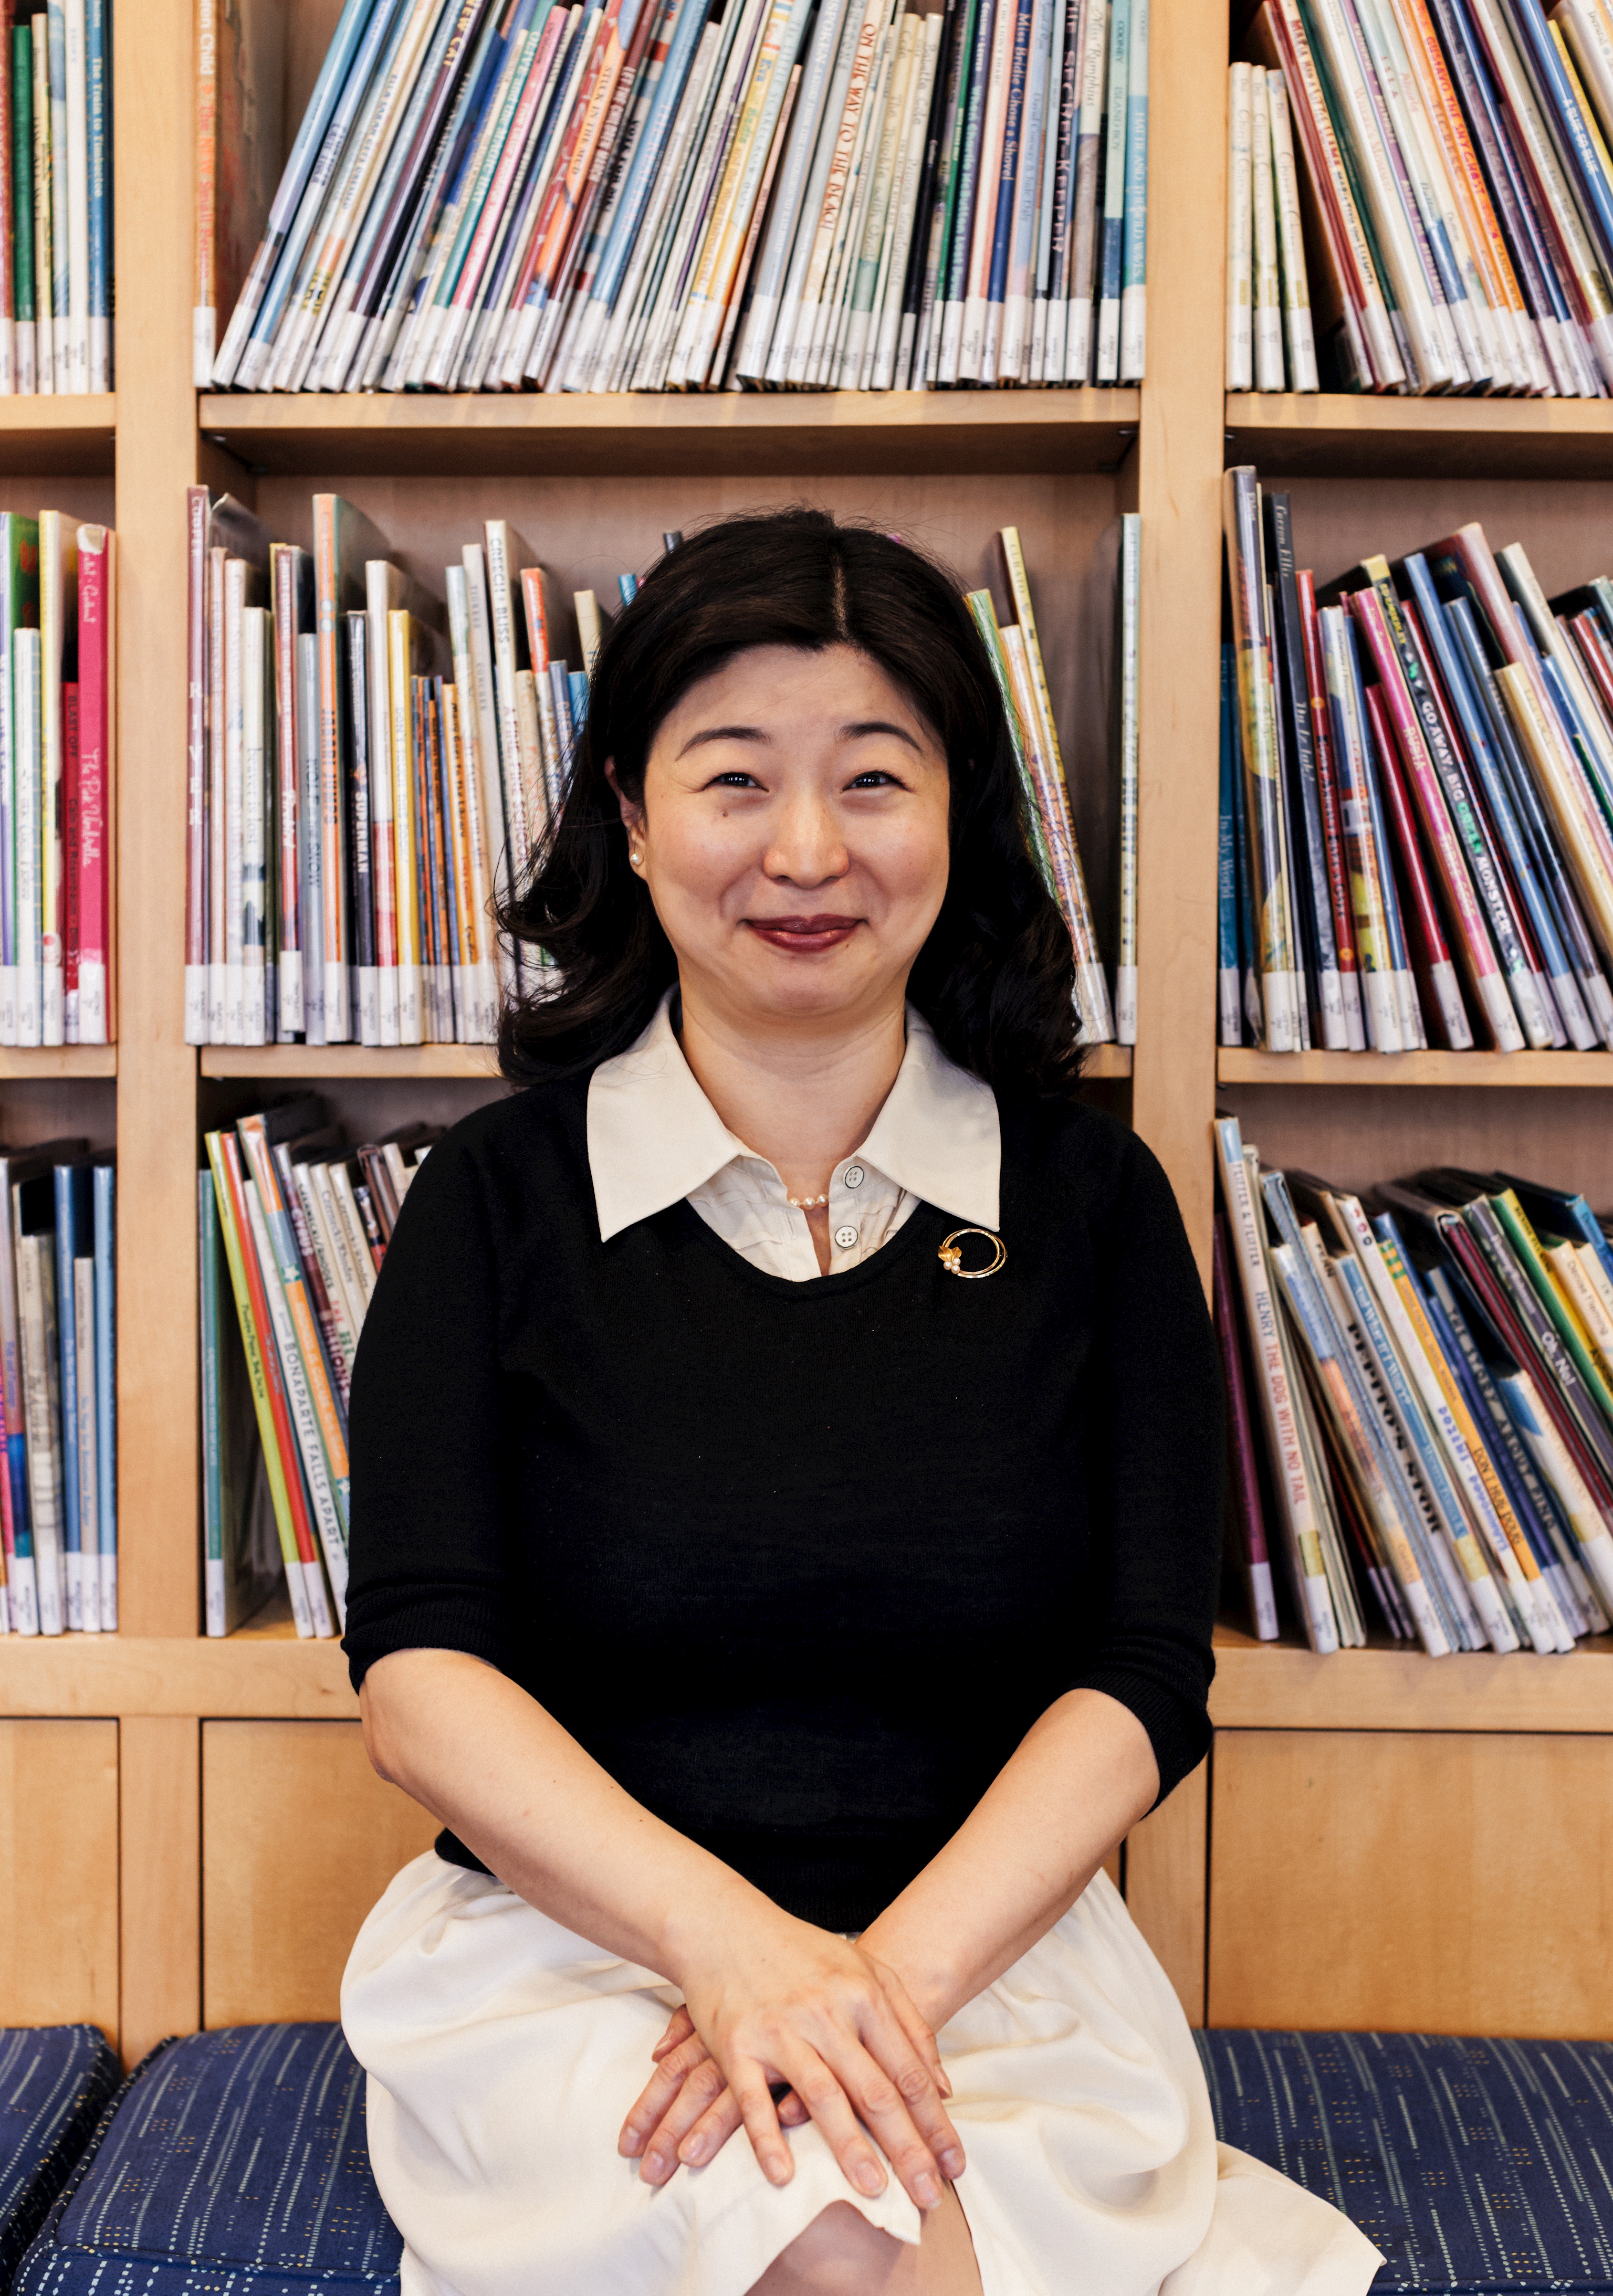 picture of female administrator in front of shelves full of books